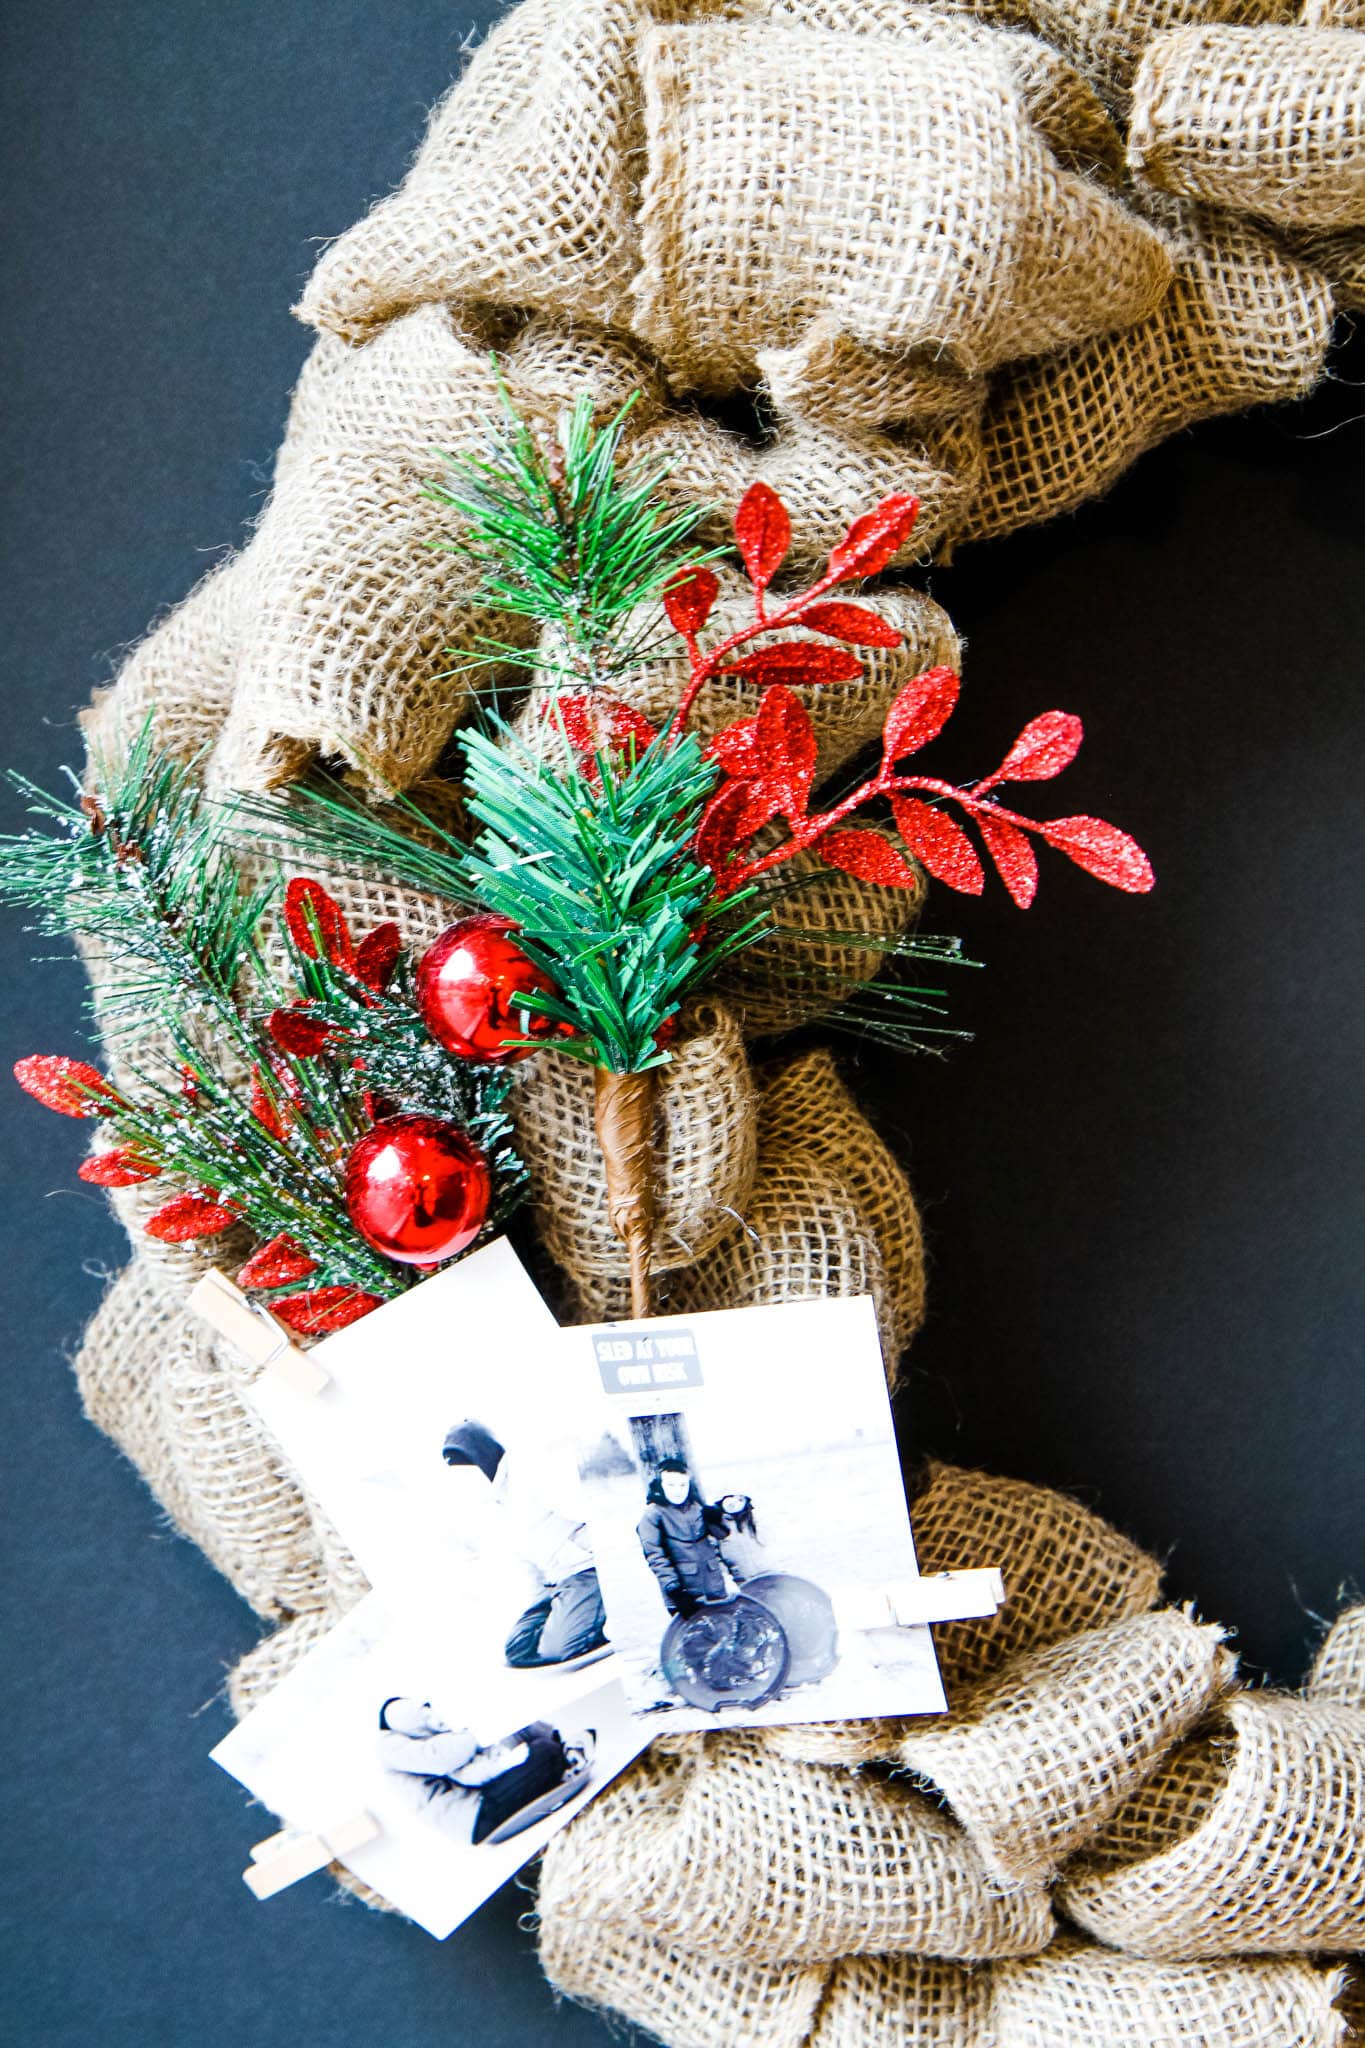 How to Make a Burlap Wreath (VIDEO)